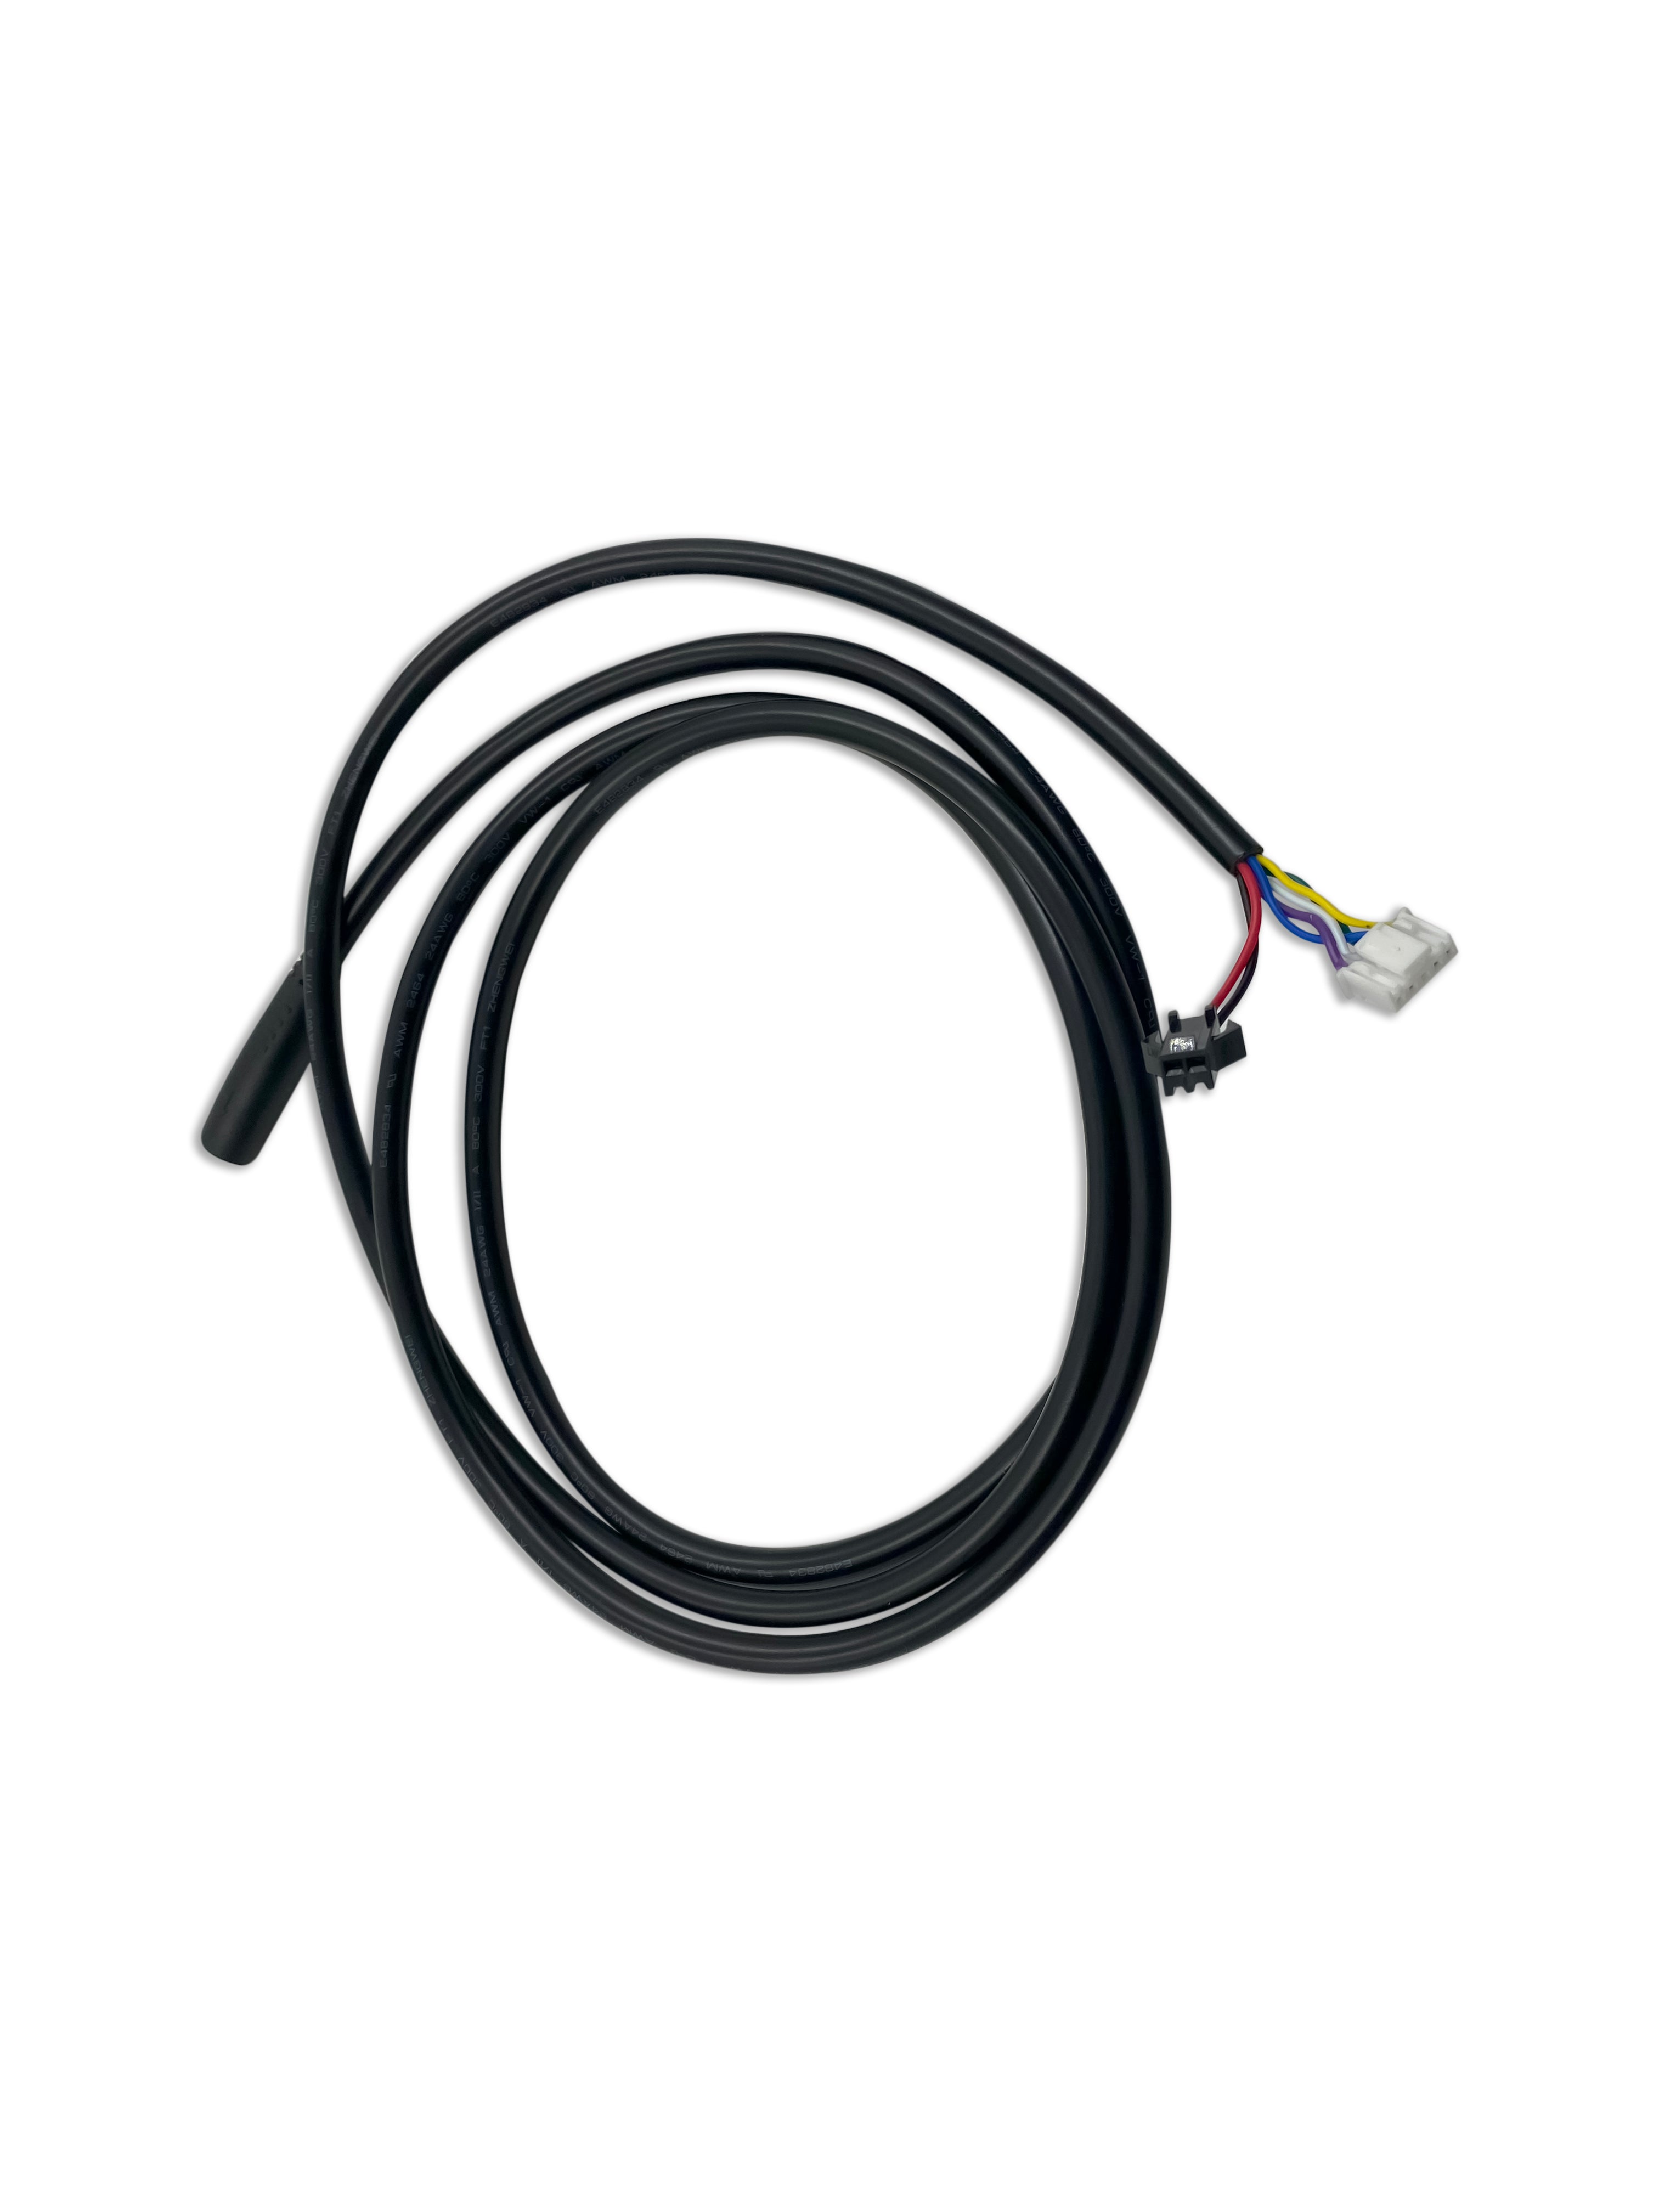 For Ninebot G30 MAX Electric Scooter Spare Main Control Connection Cable  Wire #